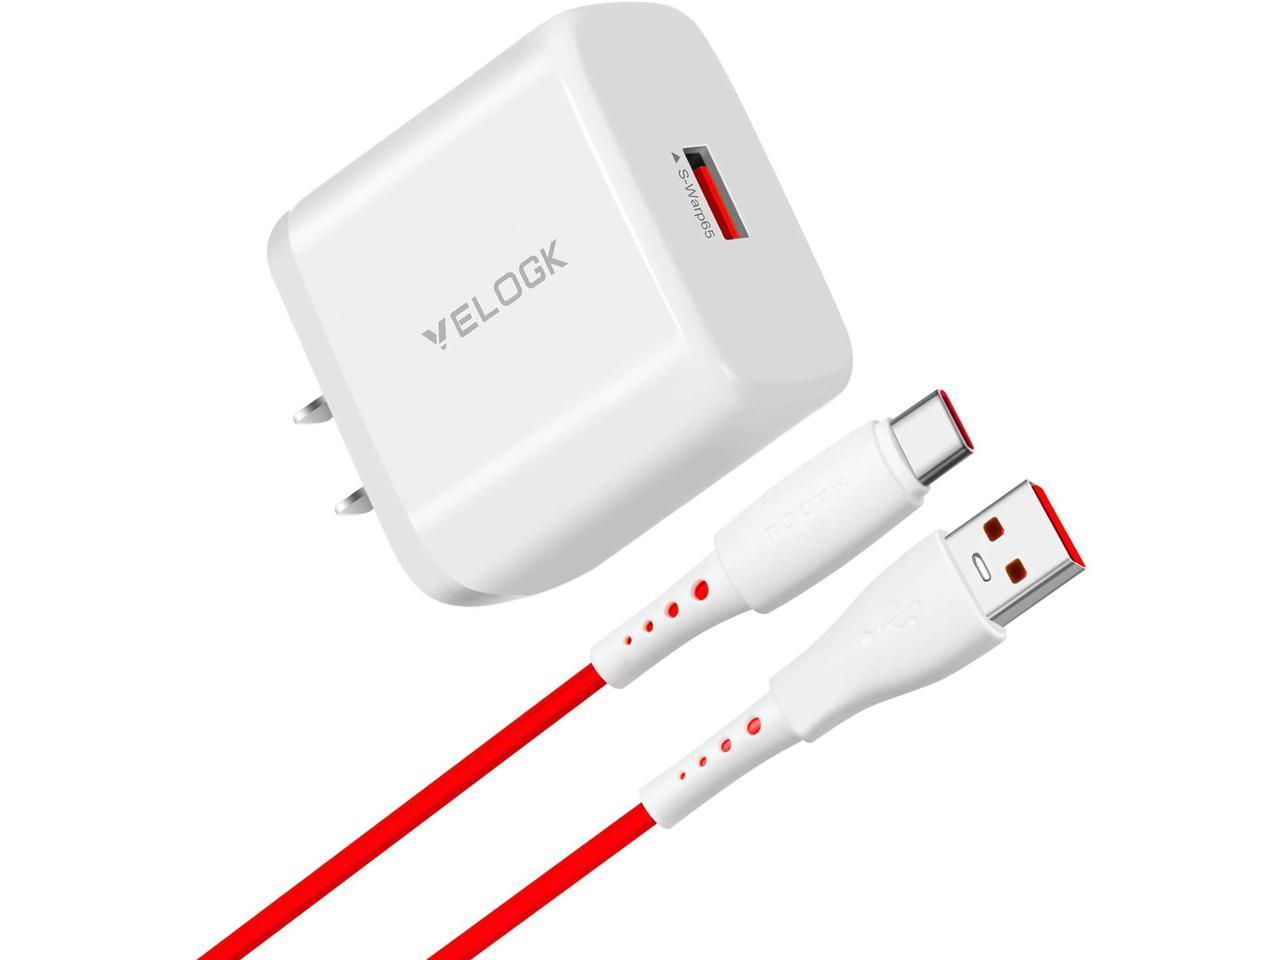 VELOGK 65W Warp Car Charger for OnePlus 8T/9 Pro/9/9R 